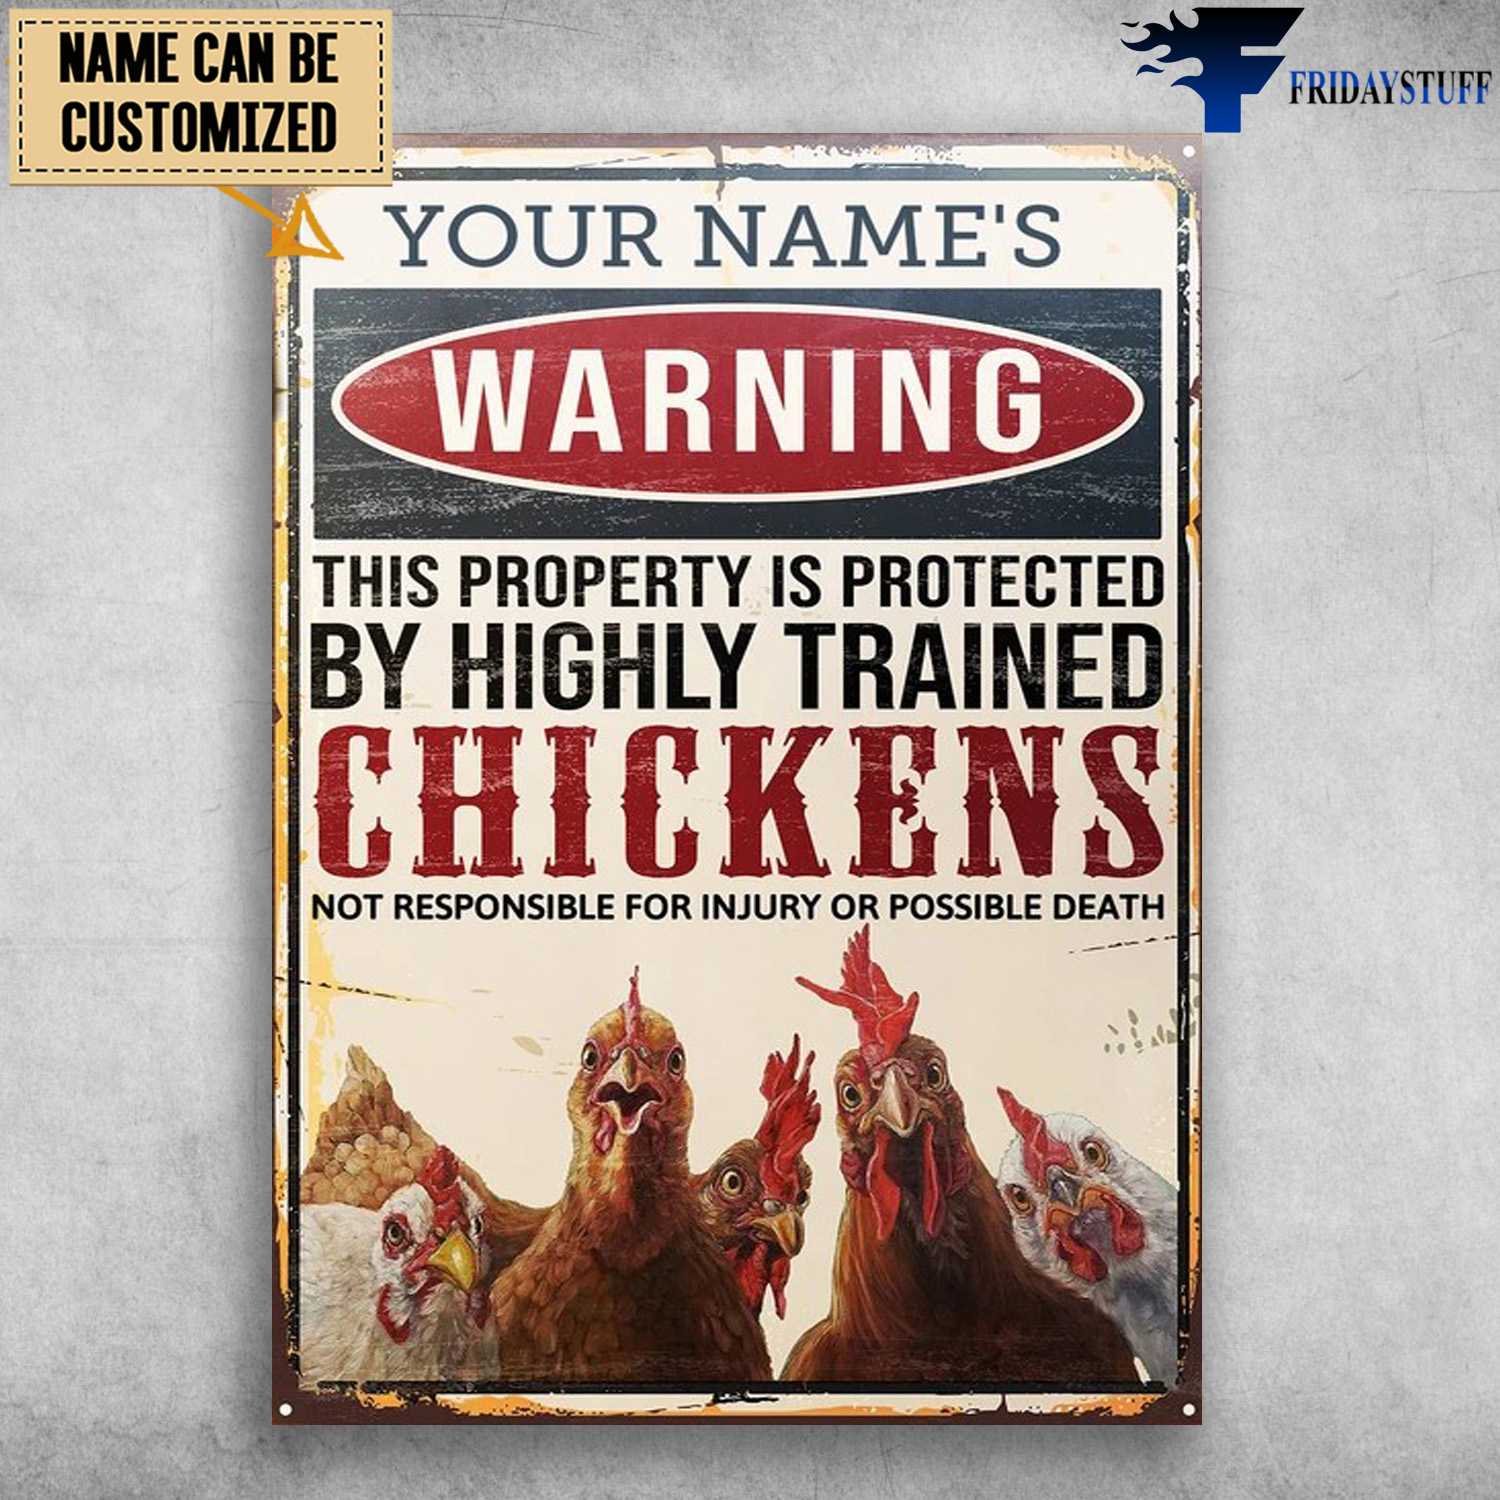 Warning Chicken, THis Property Is Protected, Be Highly Trained, Chickens Not Responsible For Injury Or Possible Death